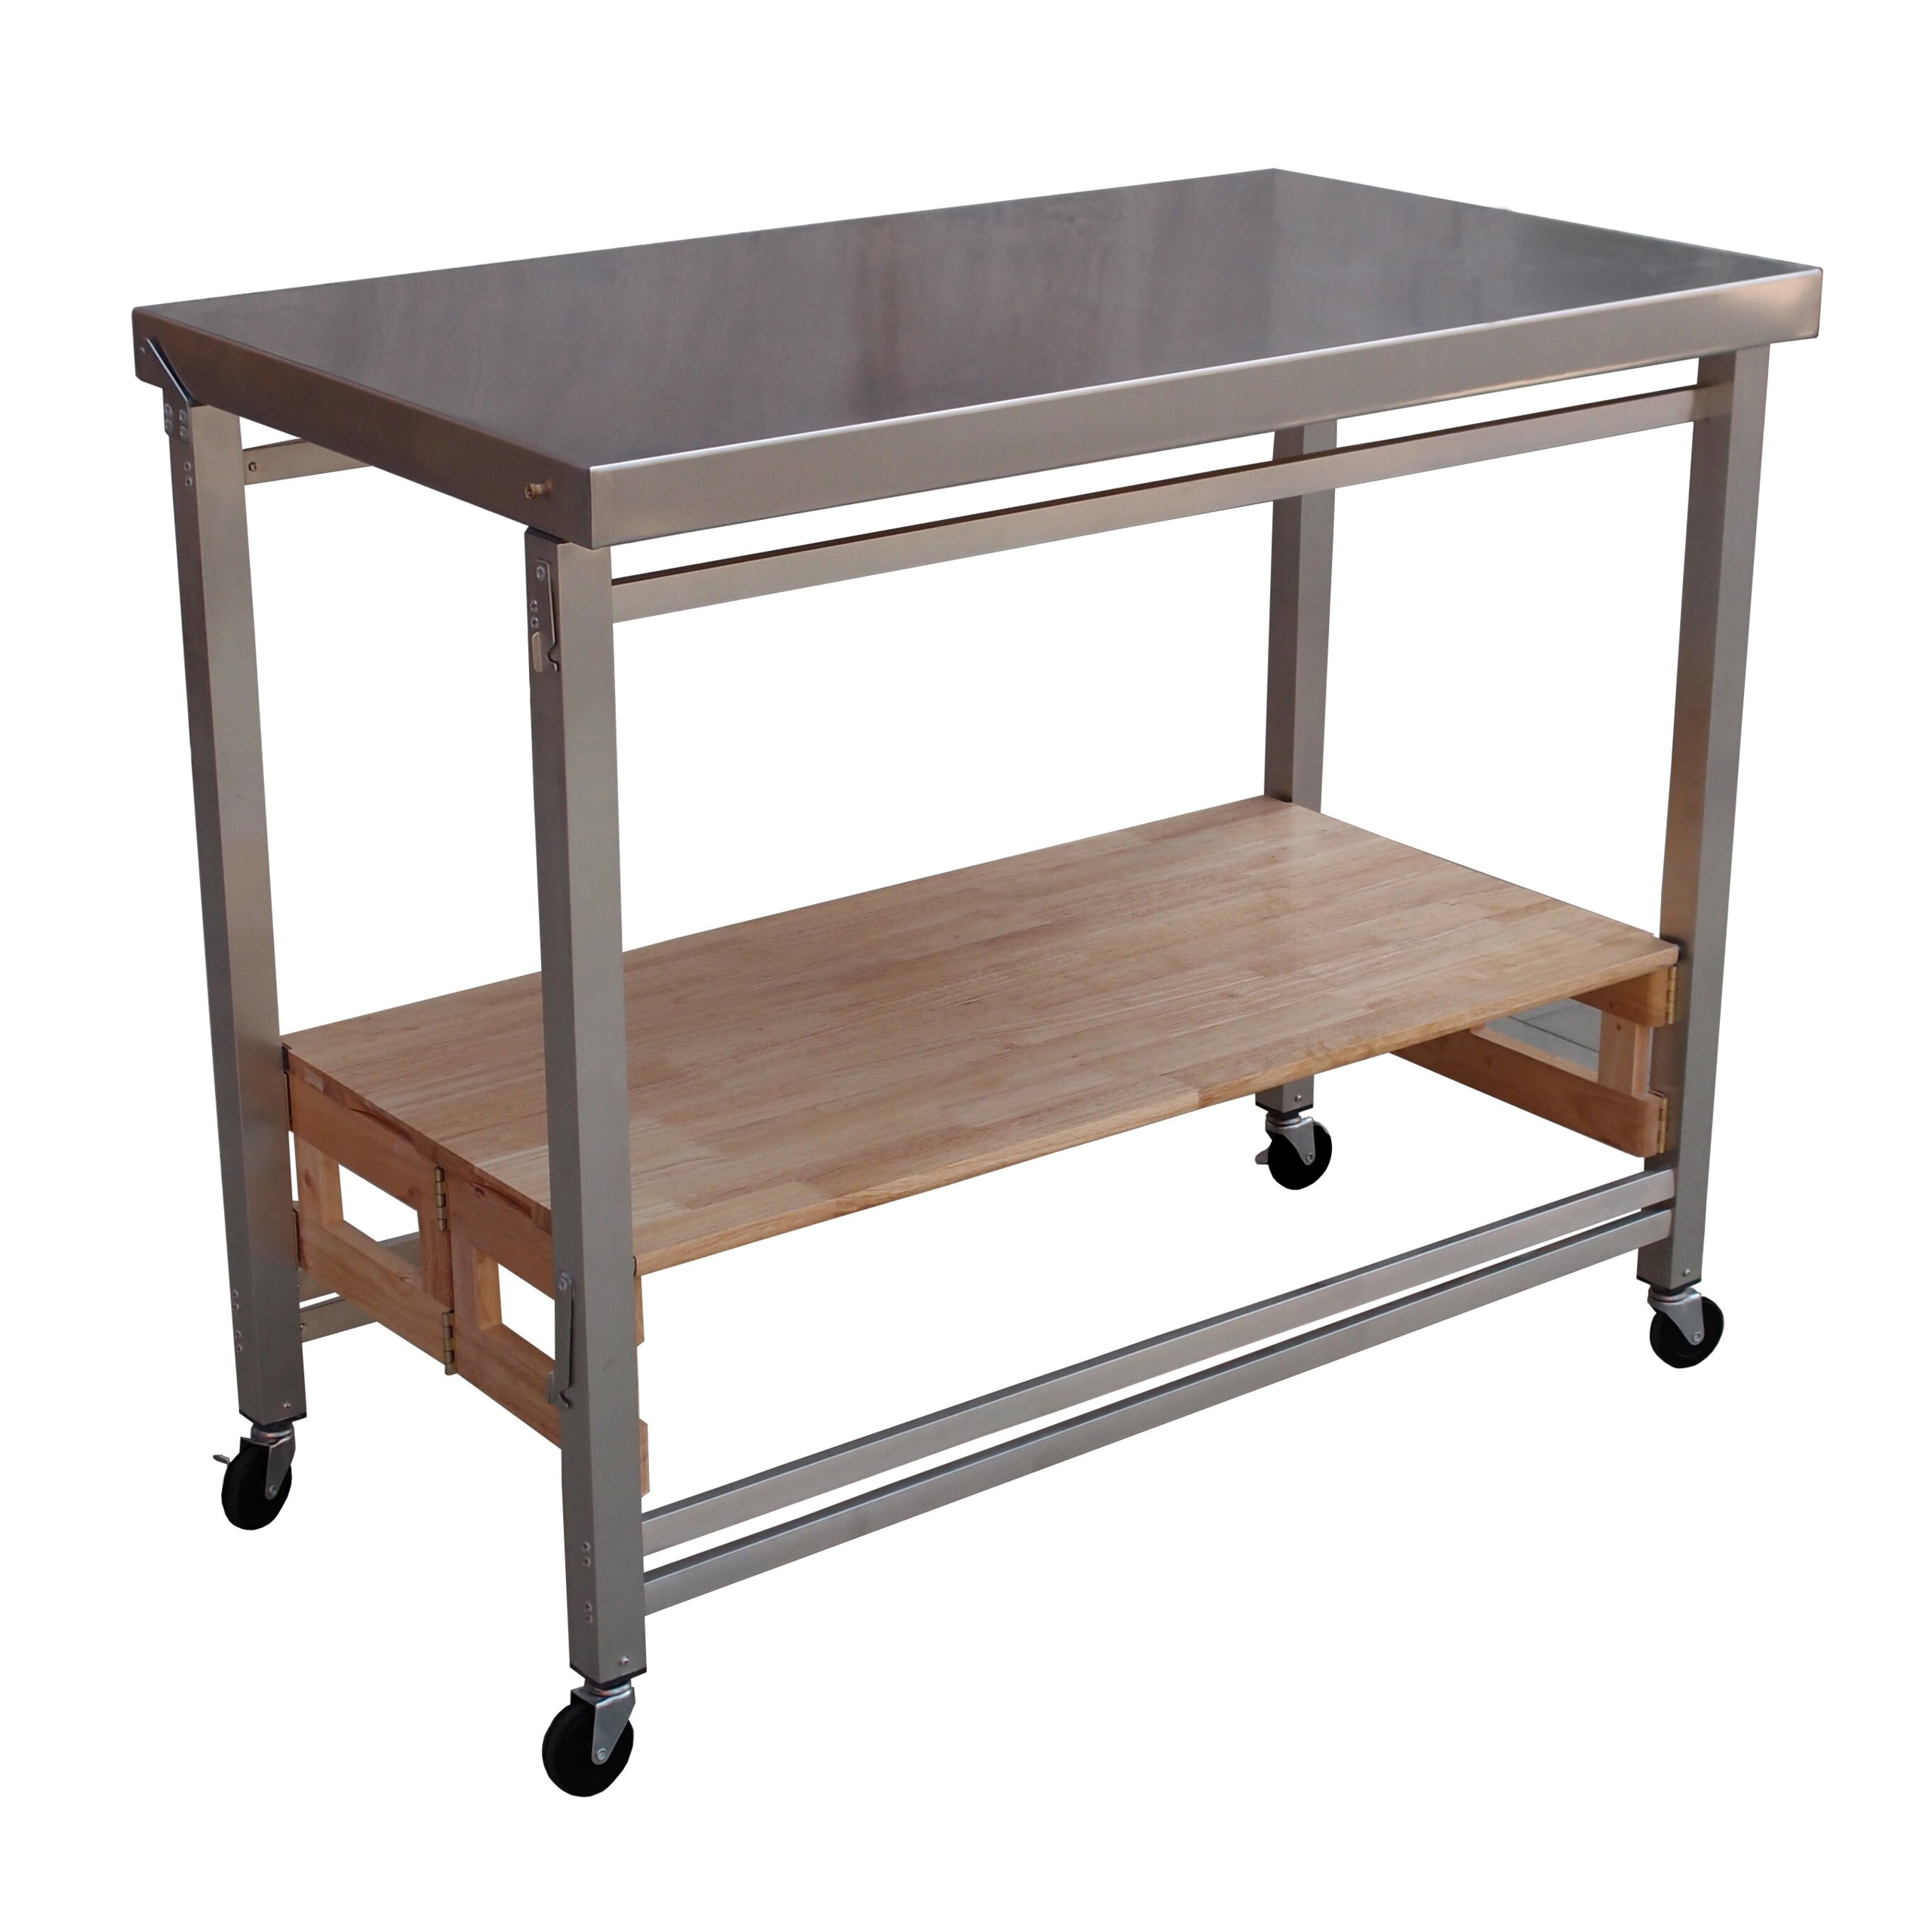 Kitchen island with stainless steel top 42